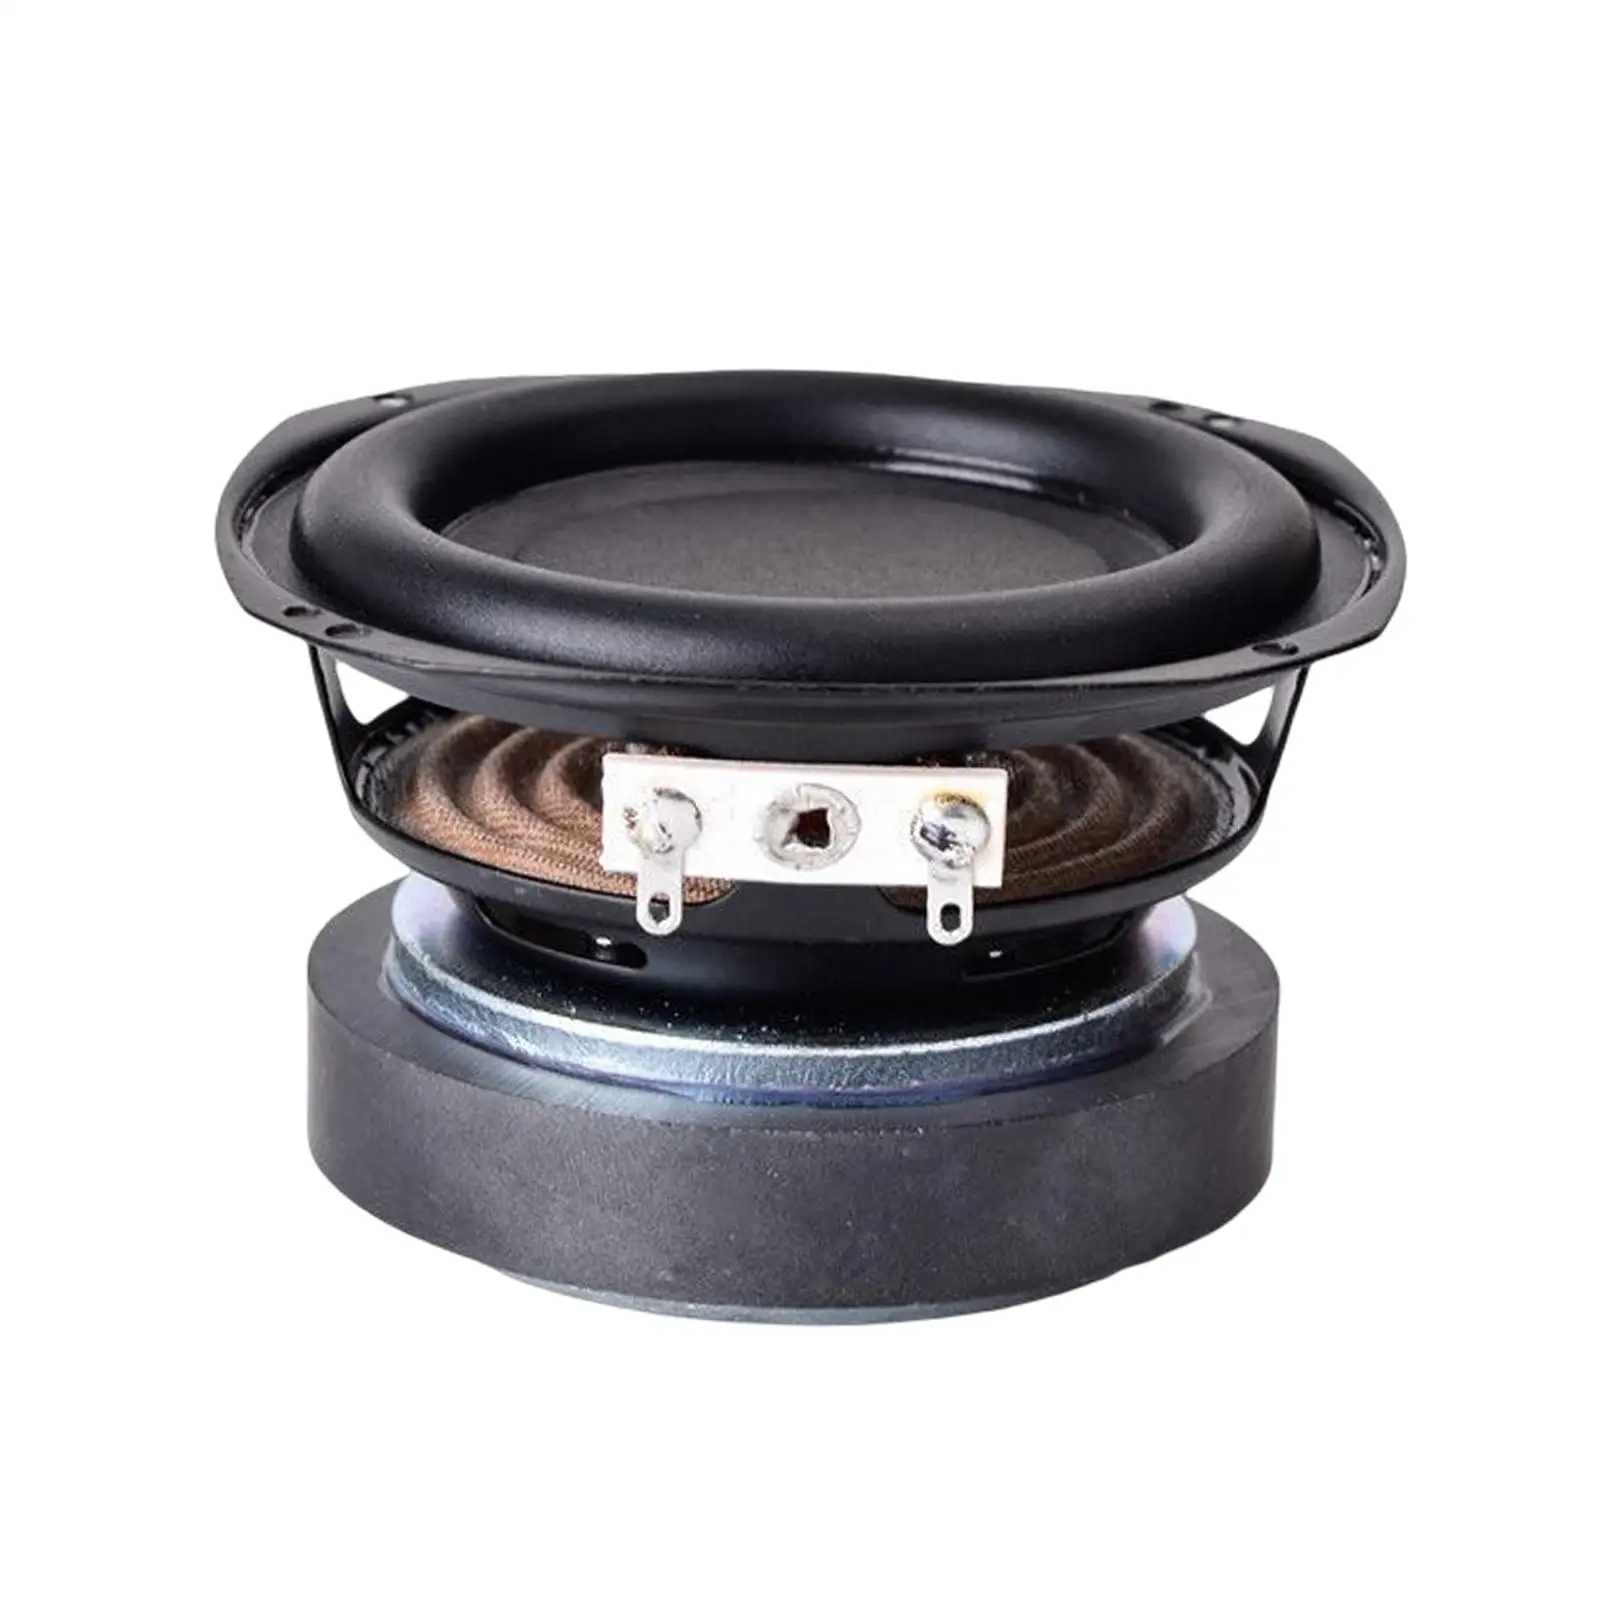 Mini Woofer Subwoofer Speaker Powerful Bass Surround Sound Stereo Rubber Edge Stable HiFi Amplifier Speaker for Home